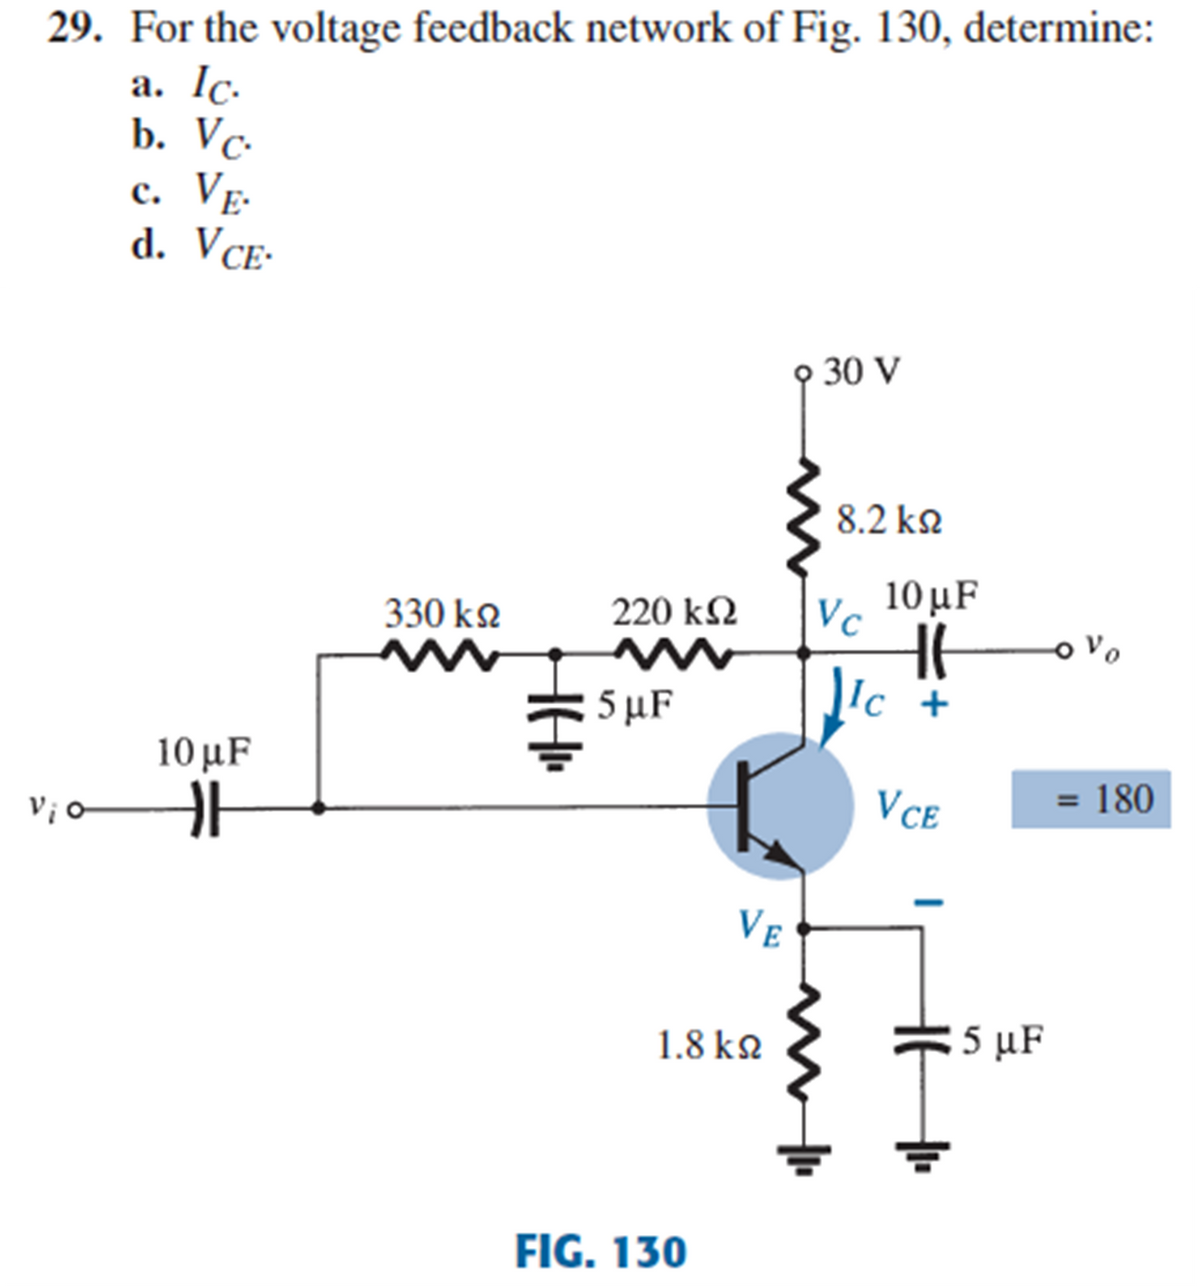 29. For the voltage feedback network of Fig. 130, determine:
a. Ic.
b. Vс
c. VẸ.
d. VCE-
o 30 V
8.2 k2
330 k2
220 k2
Vc
10 μF
o Vo
5 µF
Ic
10 μF
Vio
VCE
= 180
VE
1.8 k2
5 μF
FIG. 130
